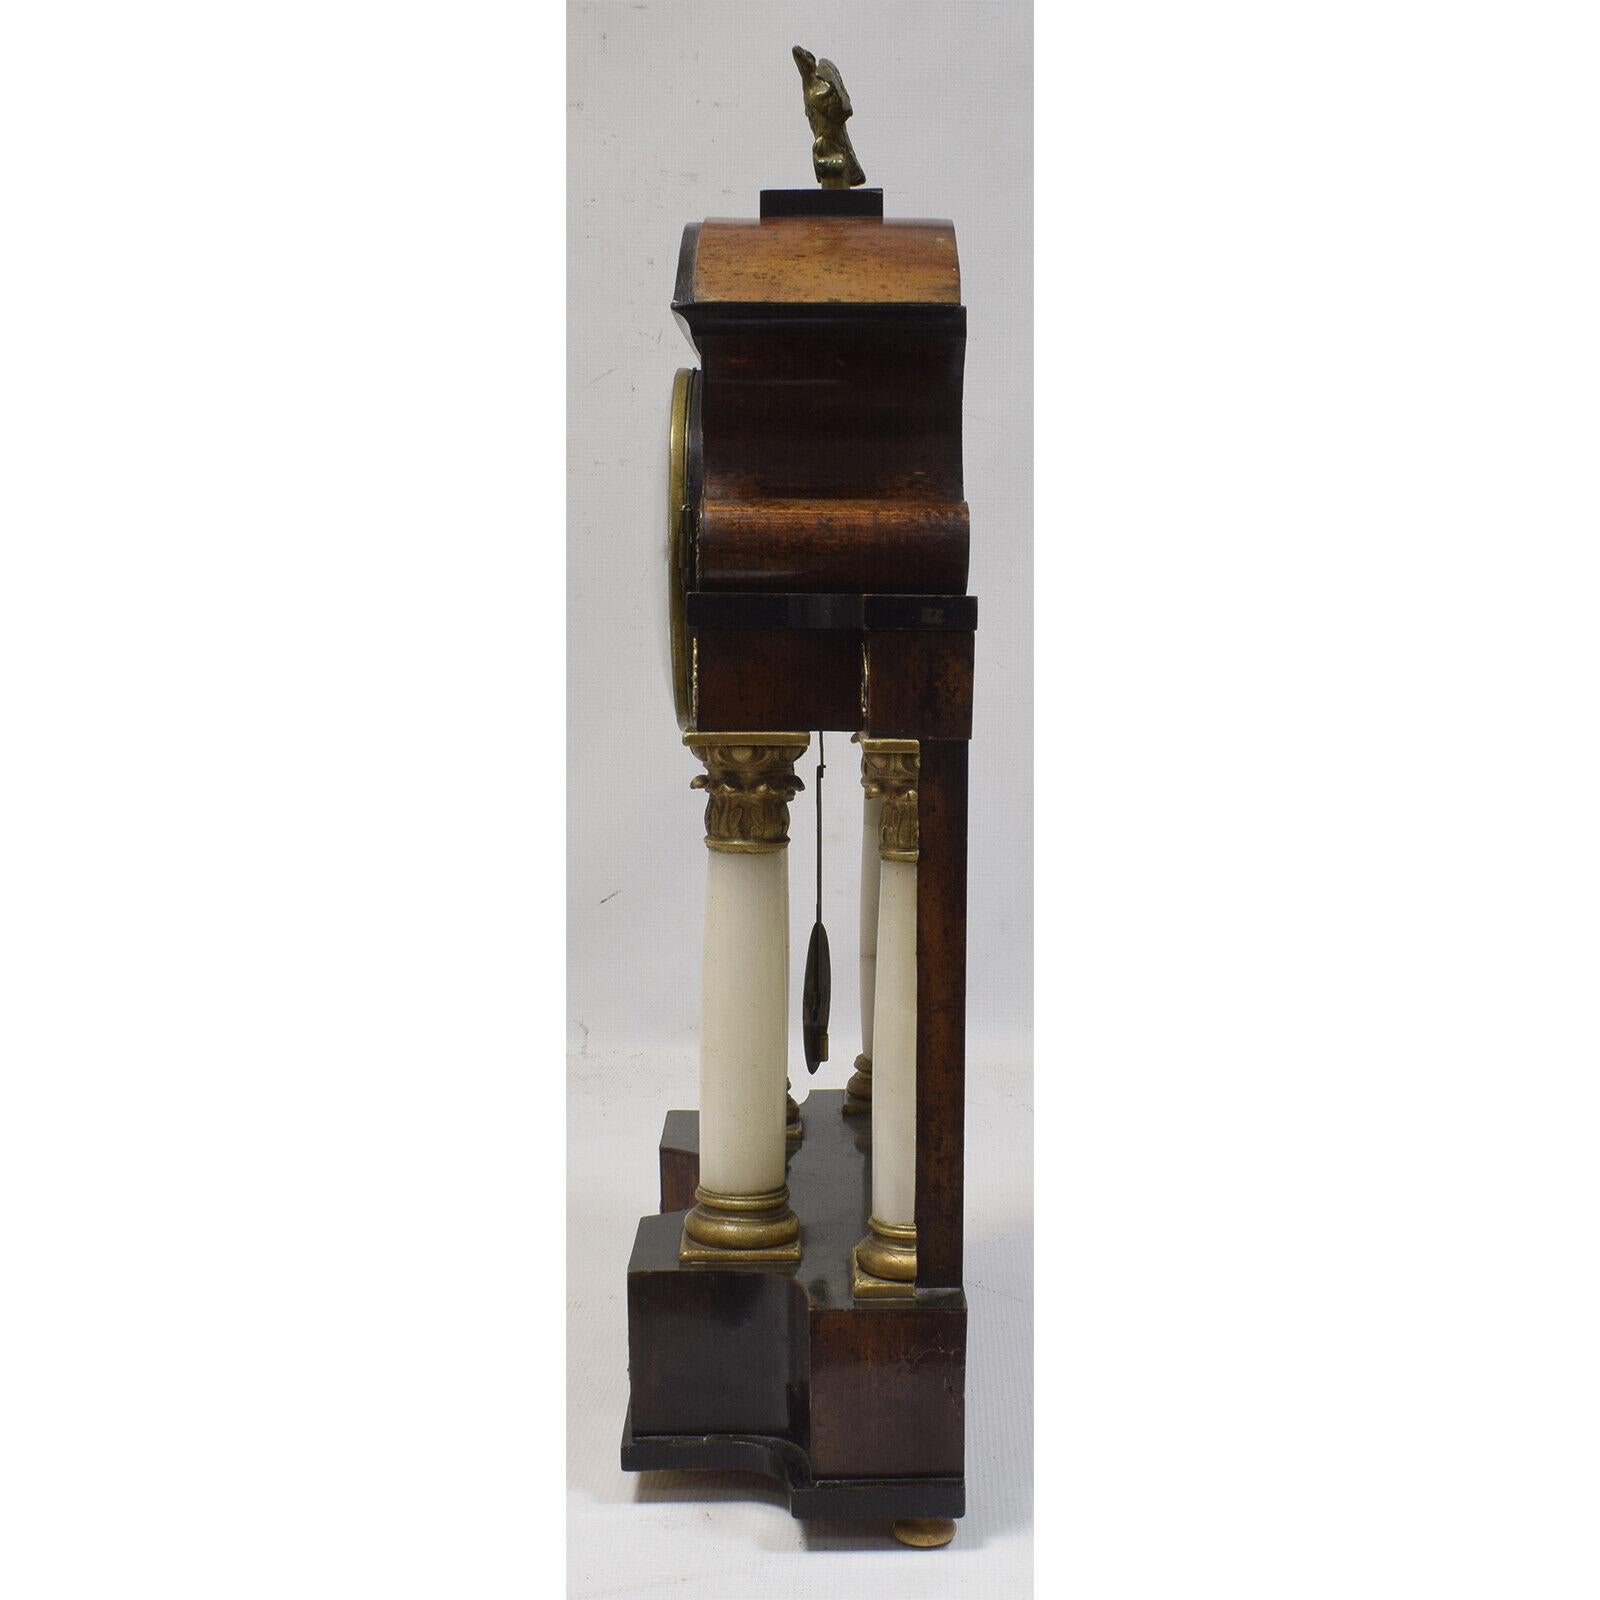 19th Century Functional Column Clock: Antique Mantel Clock with Portico, 1G05 In Fair Condition For Sale In Bordeaux, FR